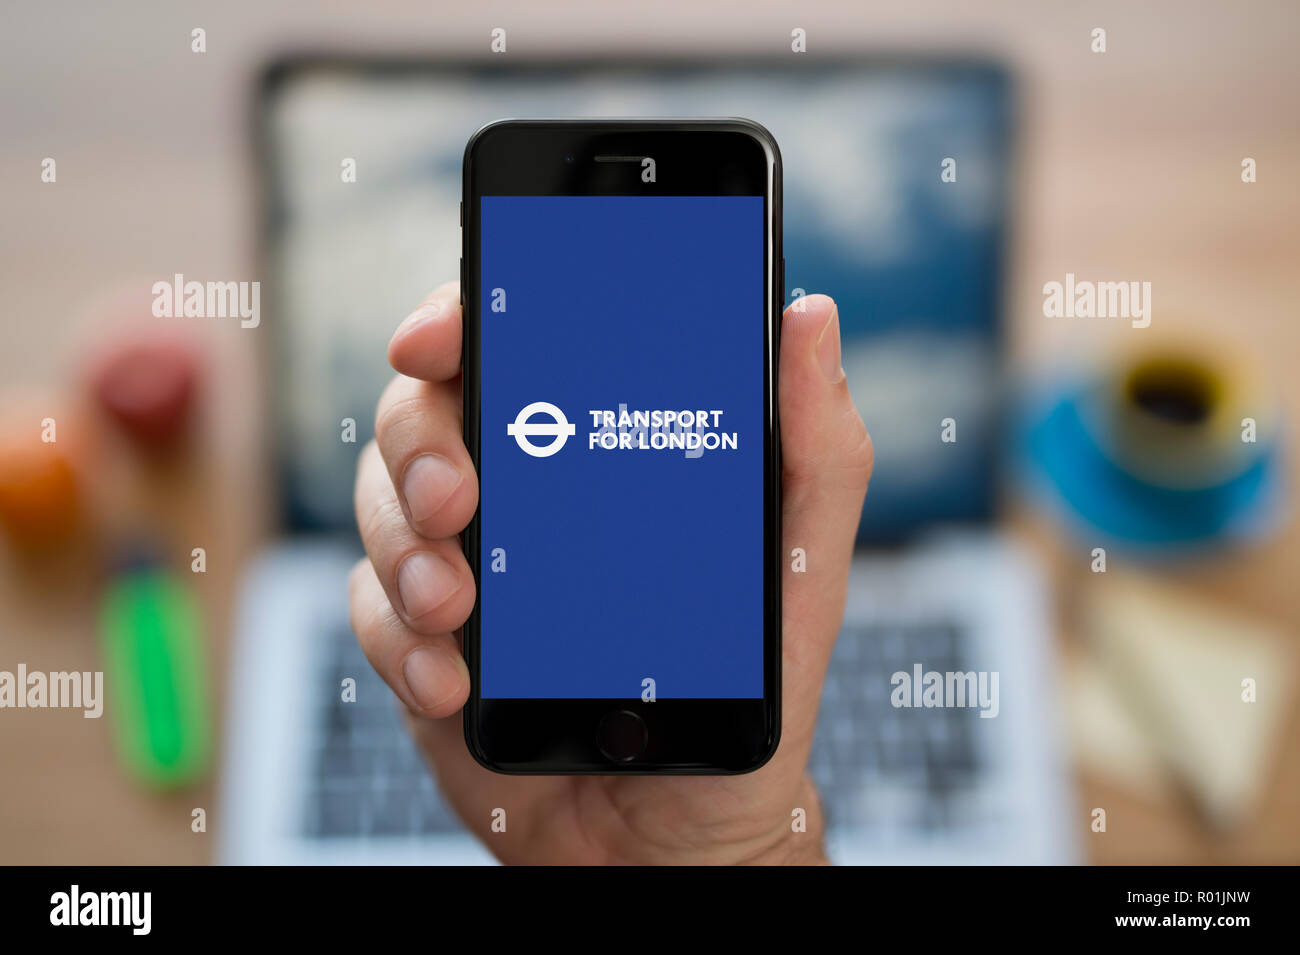 A man looks at his iPhone which displays the Transport for London (TfL) logo, while sat at his computer desk (Editorial use only). Stock Photo